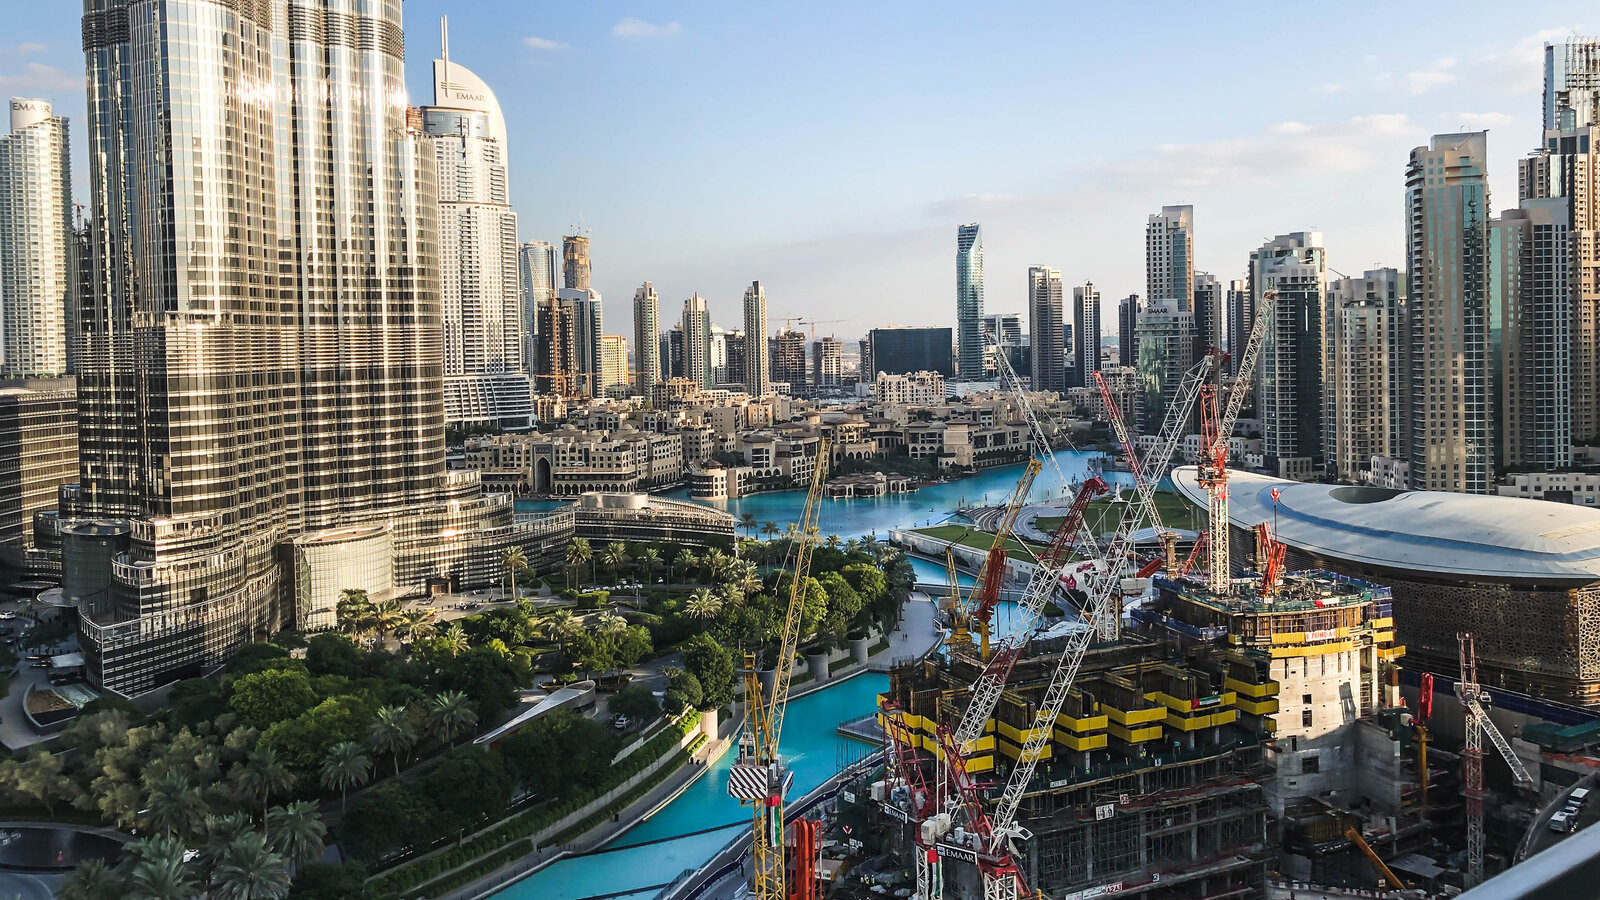 A Complete Guide to Buying Real Estate in Dubai: From Choosing the Property to Moving In